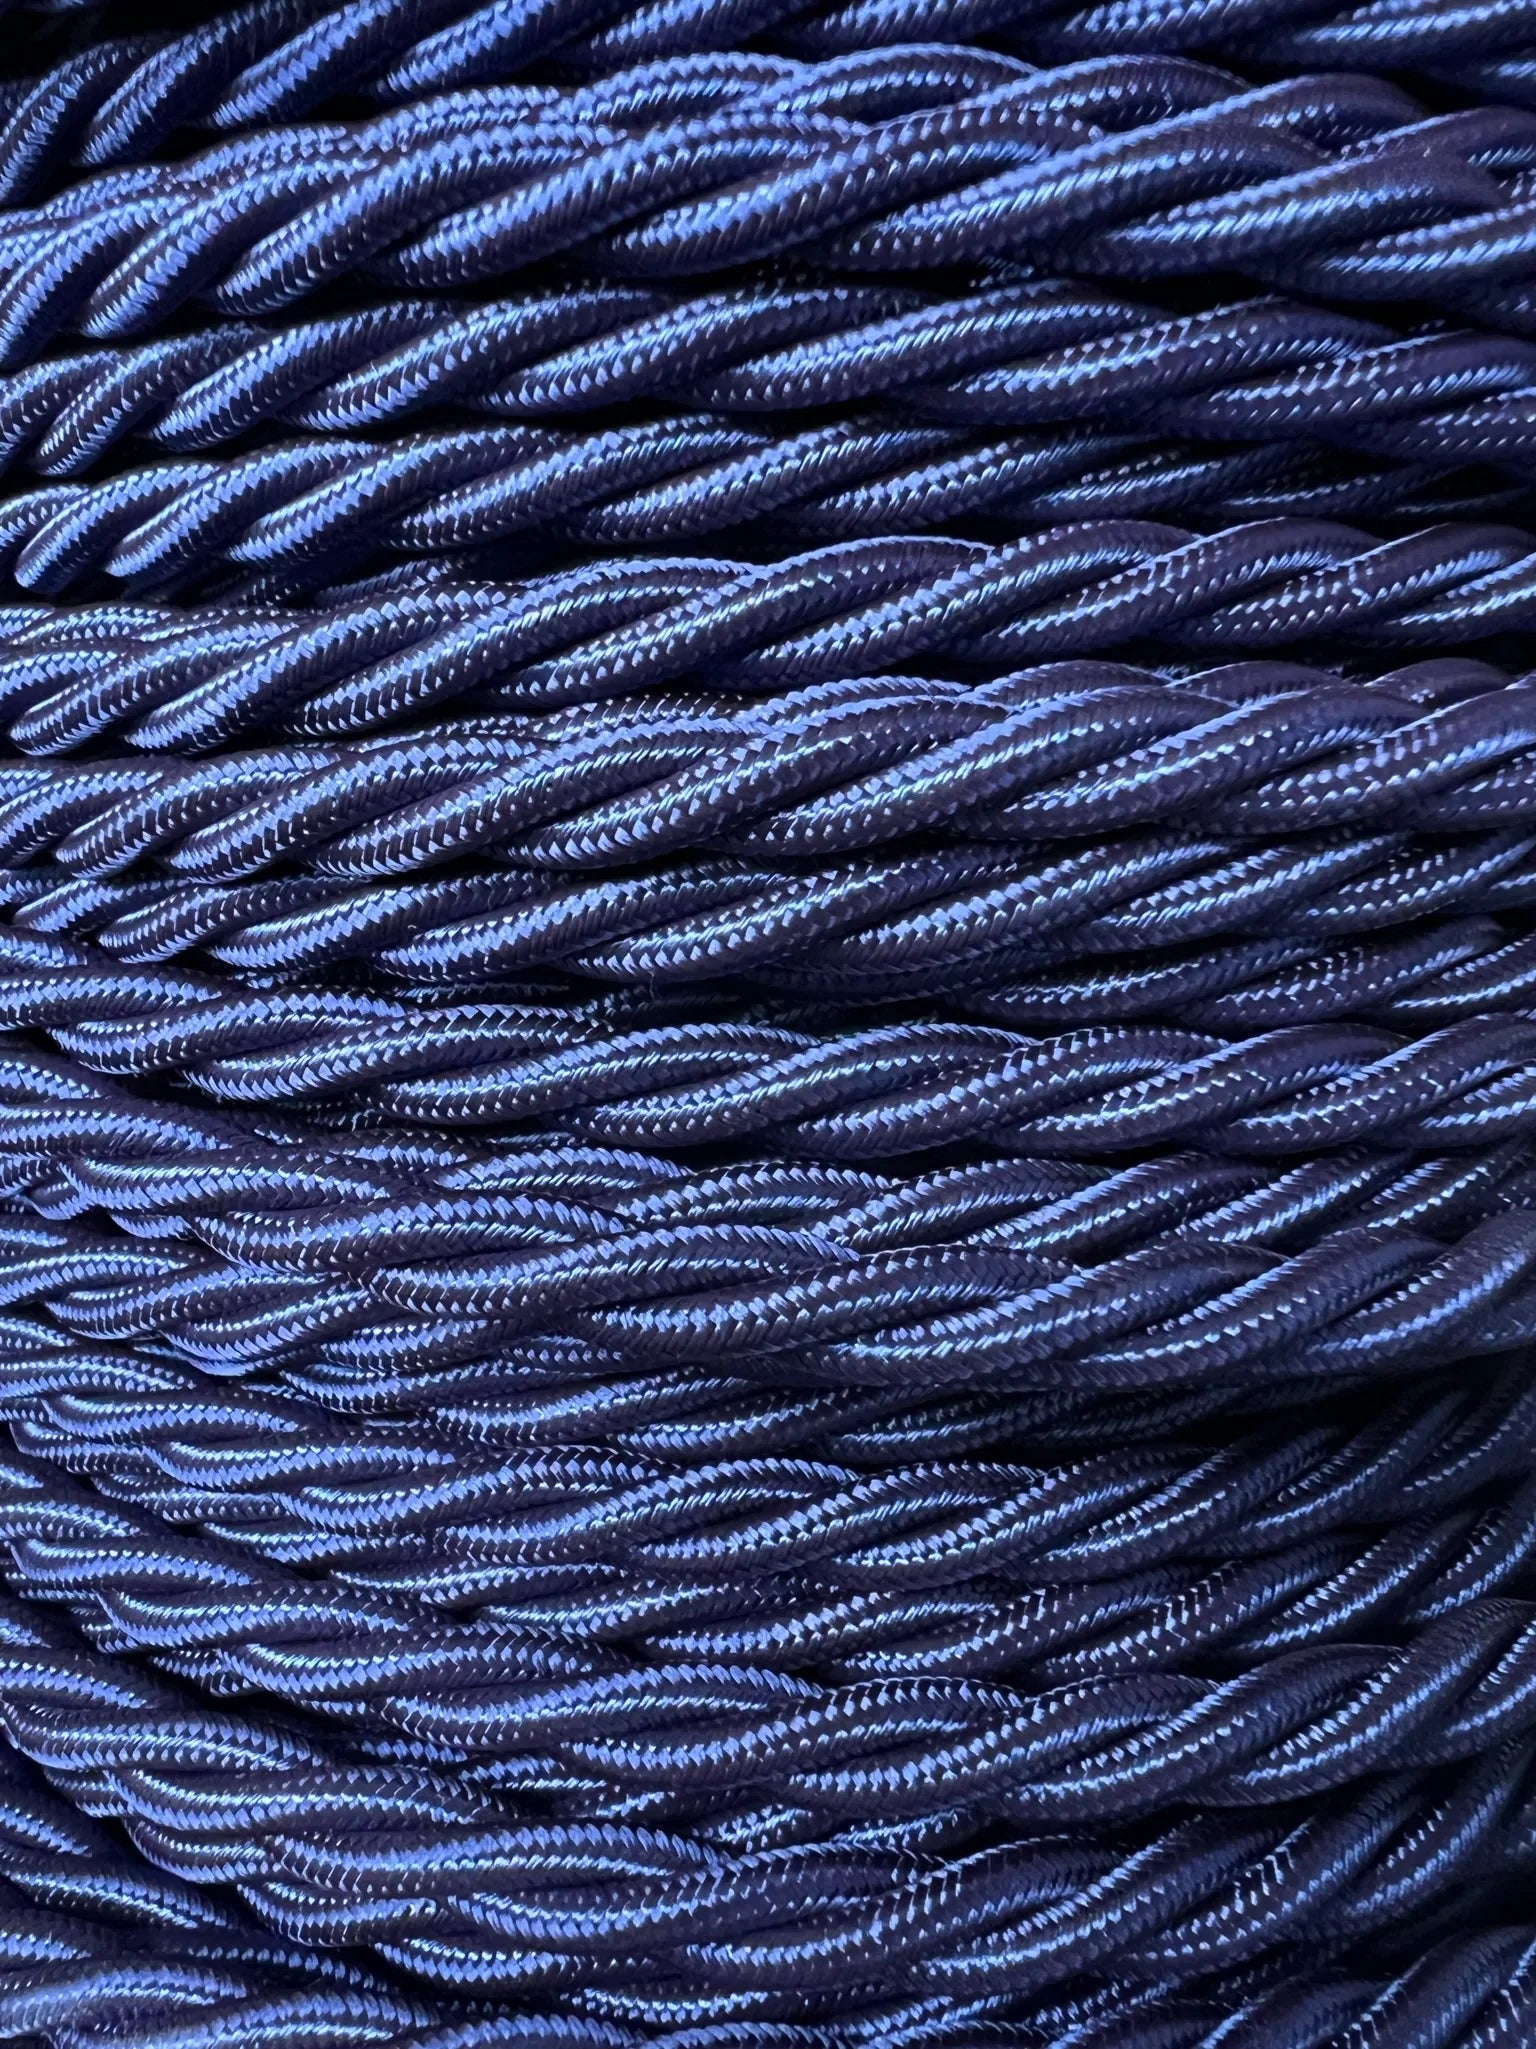 Indigo + White - Lola's Leads Fabric Extension Cable